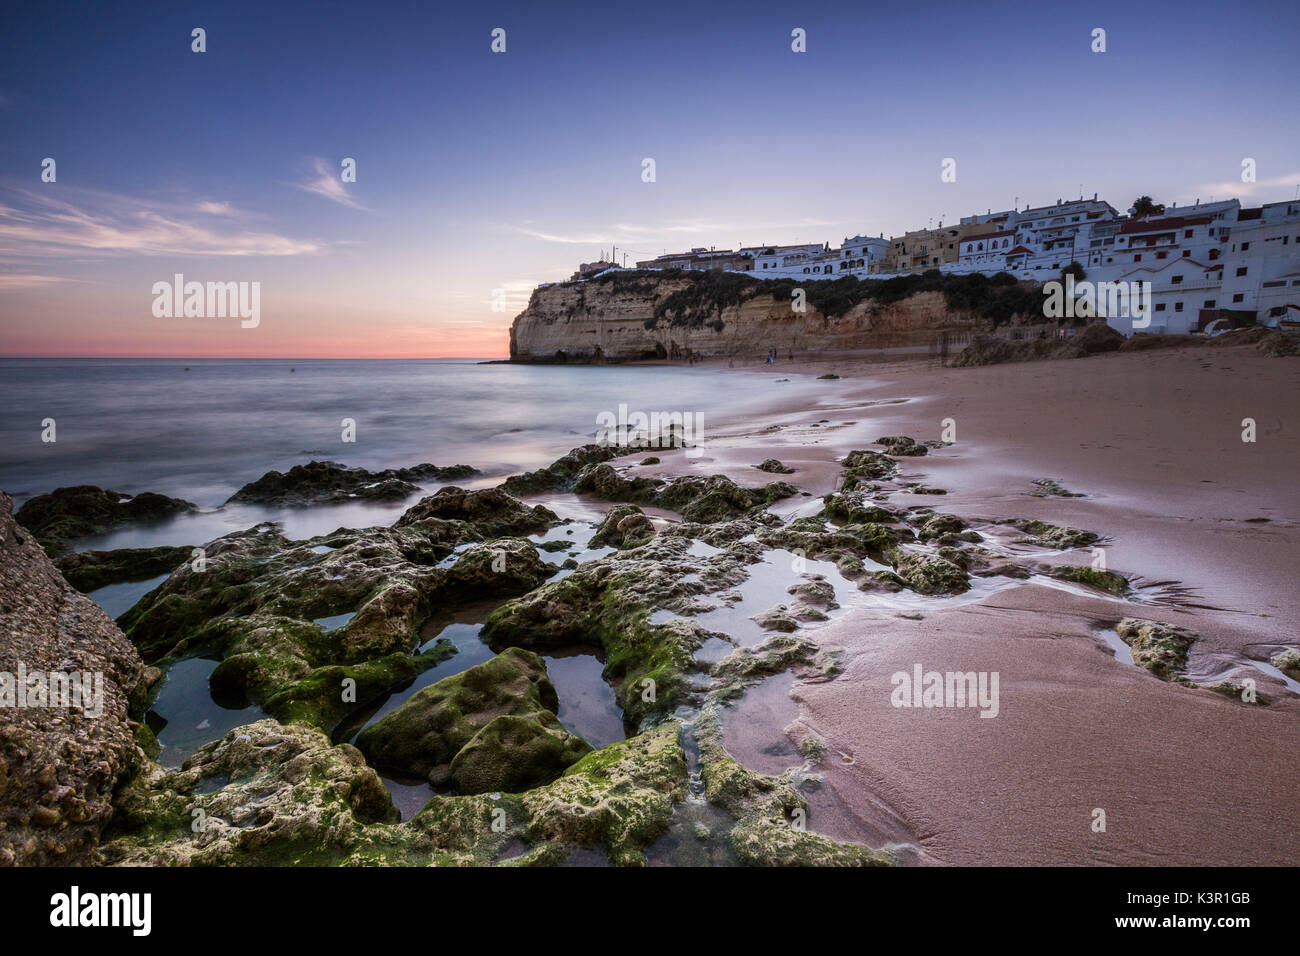 Sunset on the village perched on the promontory overlooking the beach of Carvoeiro Algarve Lagoa Faro District Portugal Europe Stock Photo